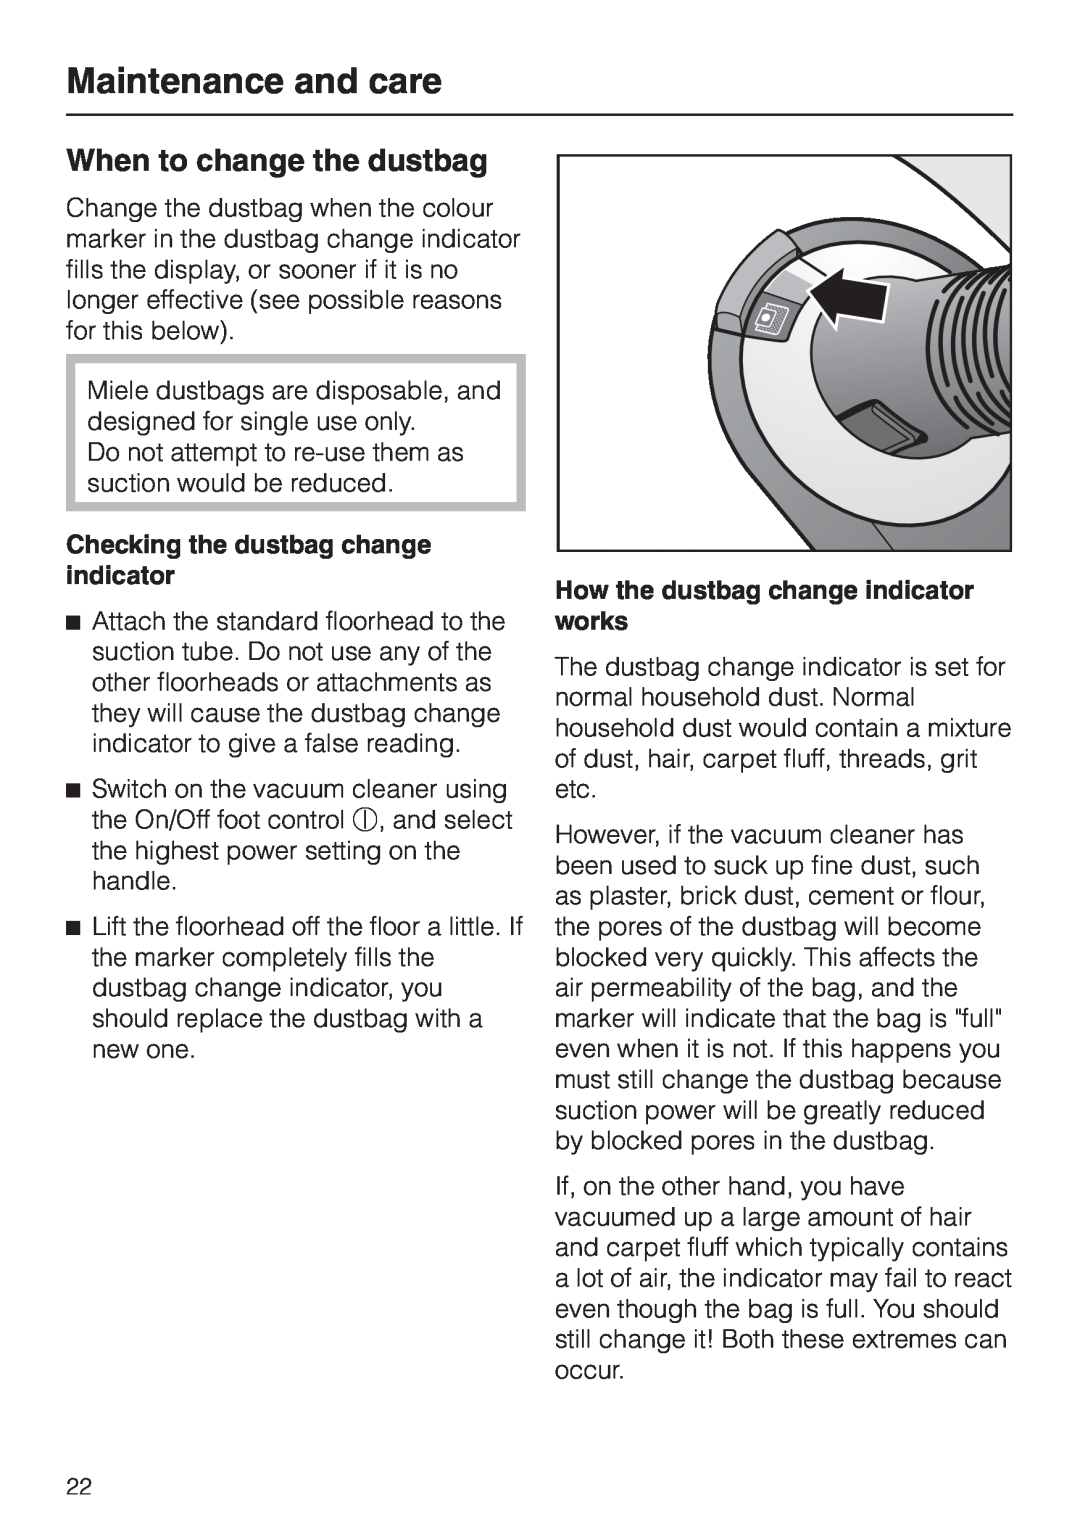 Miele S 5980 manual When to change the dustbag, Maintenance and care, Checking the dustbag change indicator 